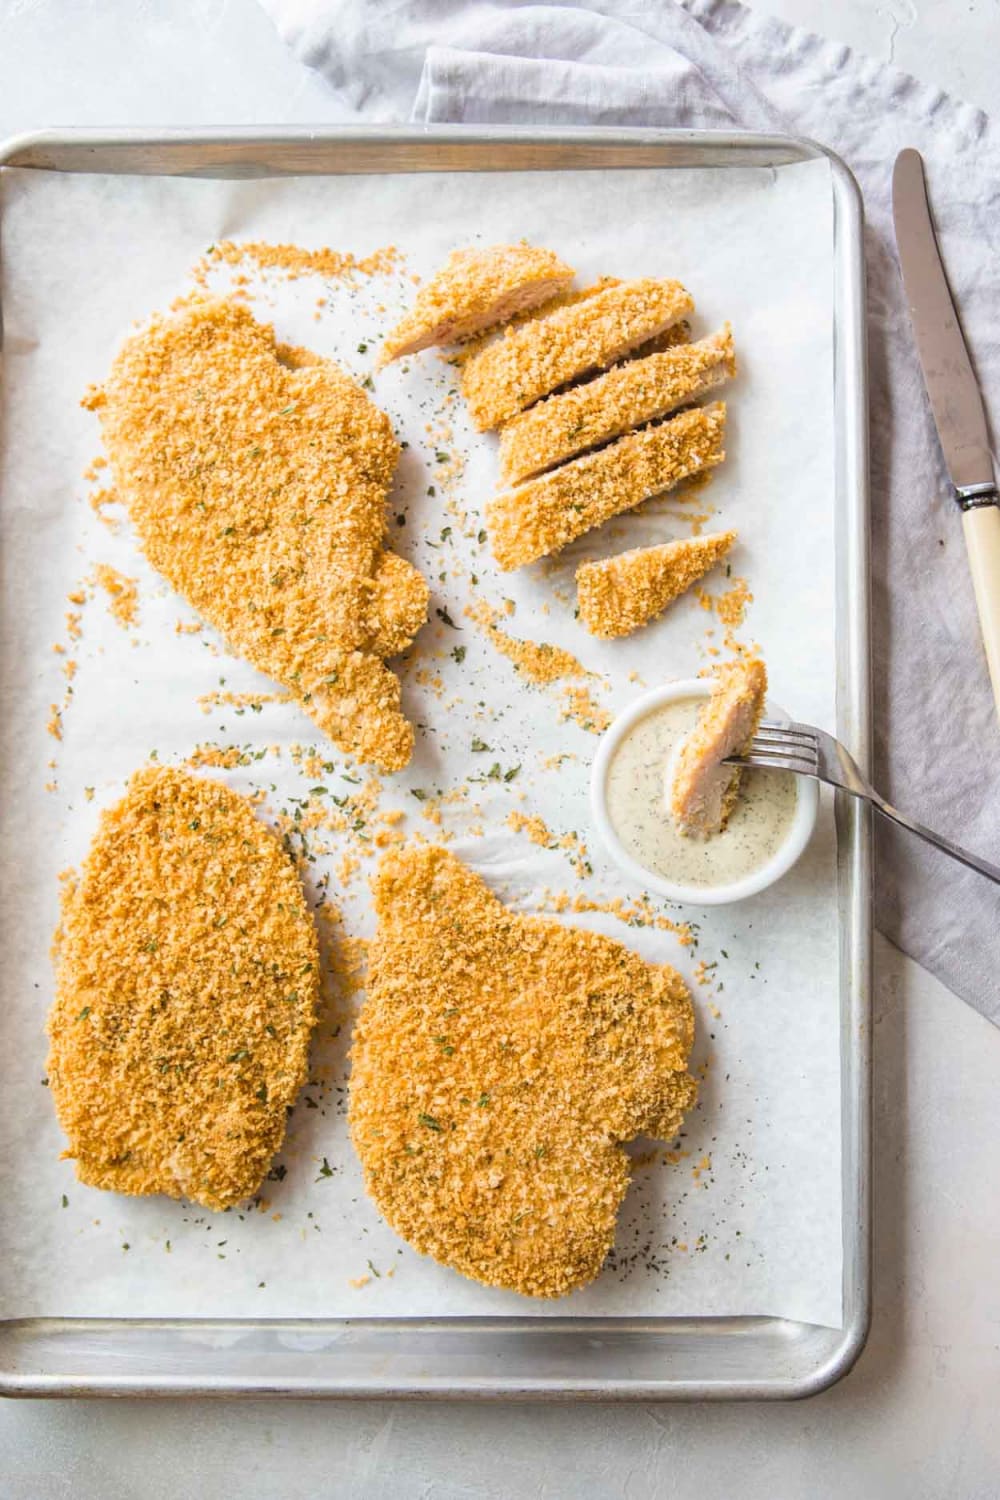 Baked Chicken Cutlets (Ready In Under 30 Minutes!)